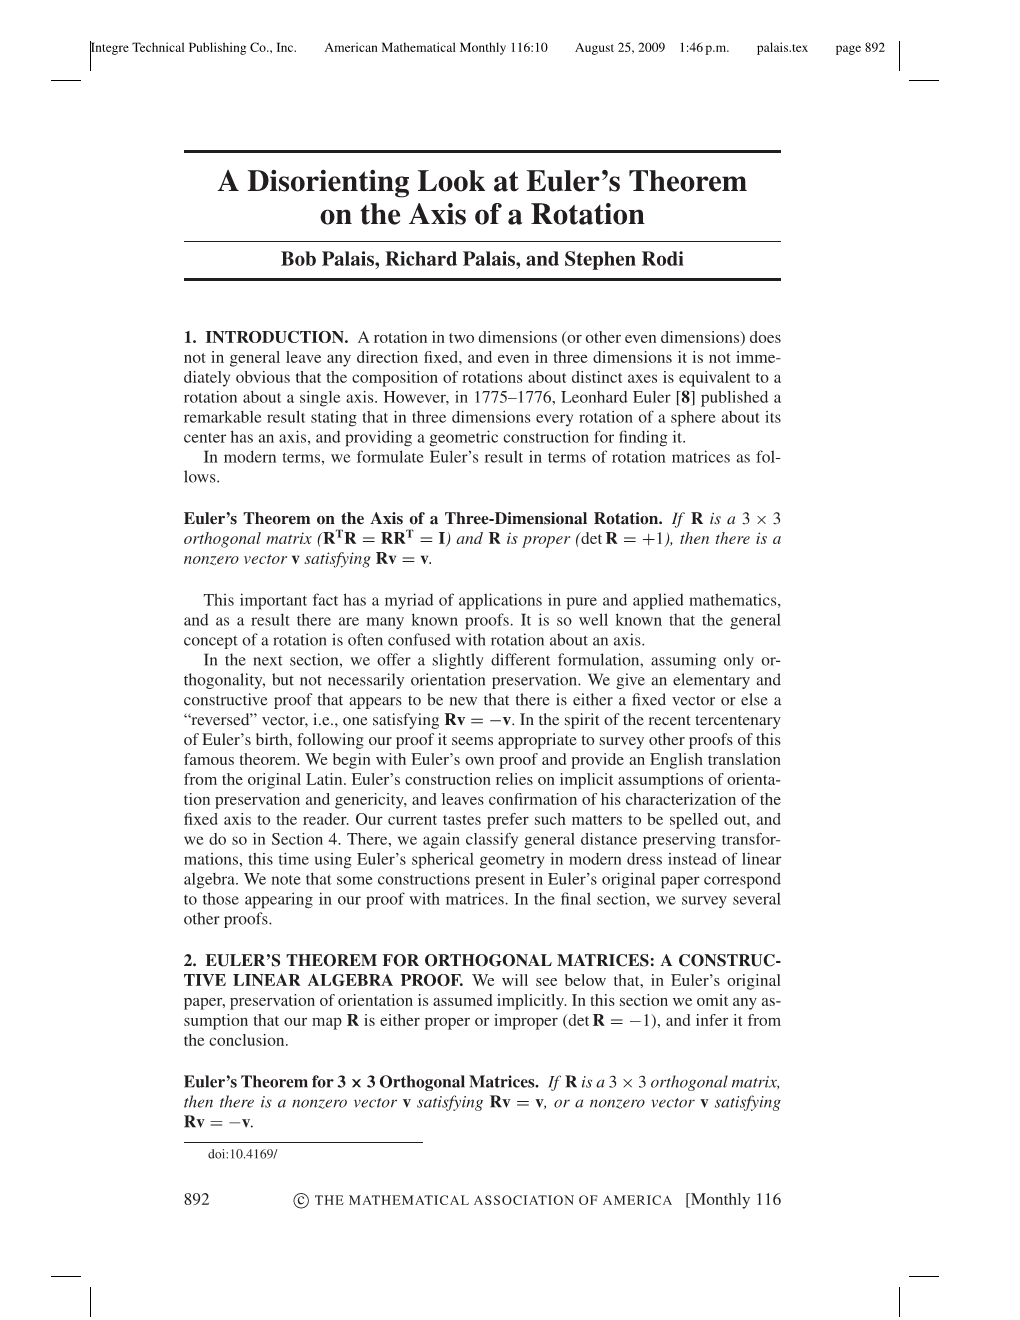 A Disorienting Look at Euler's Theorem on The